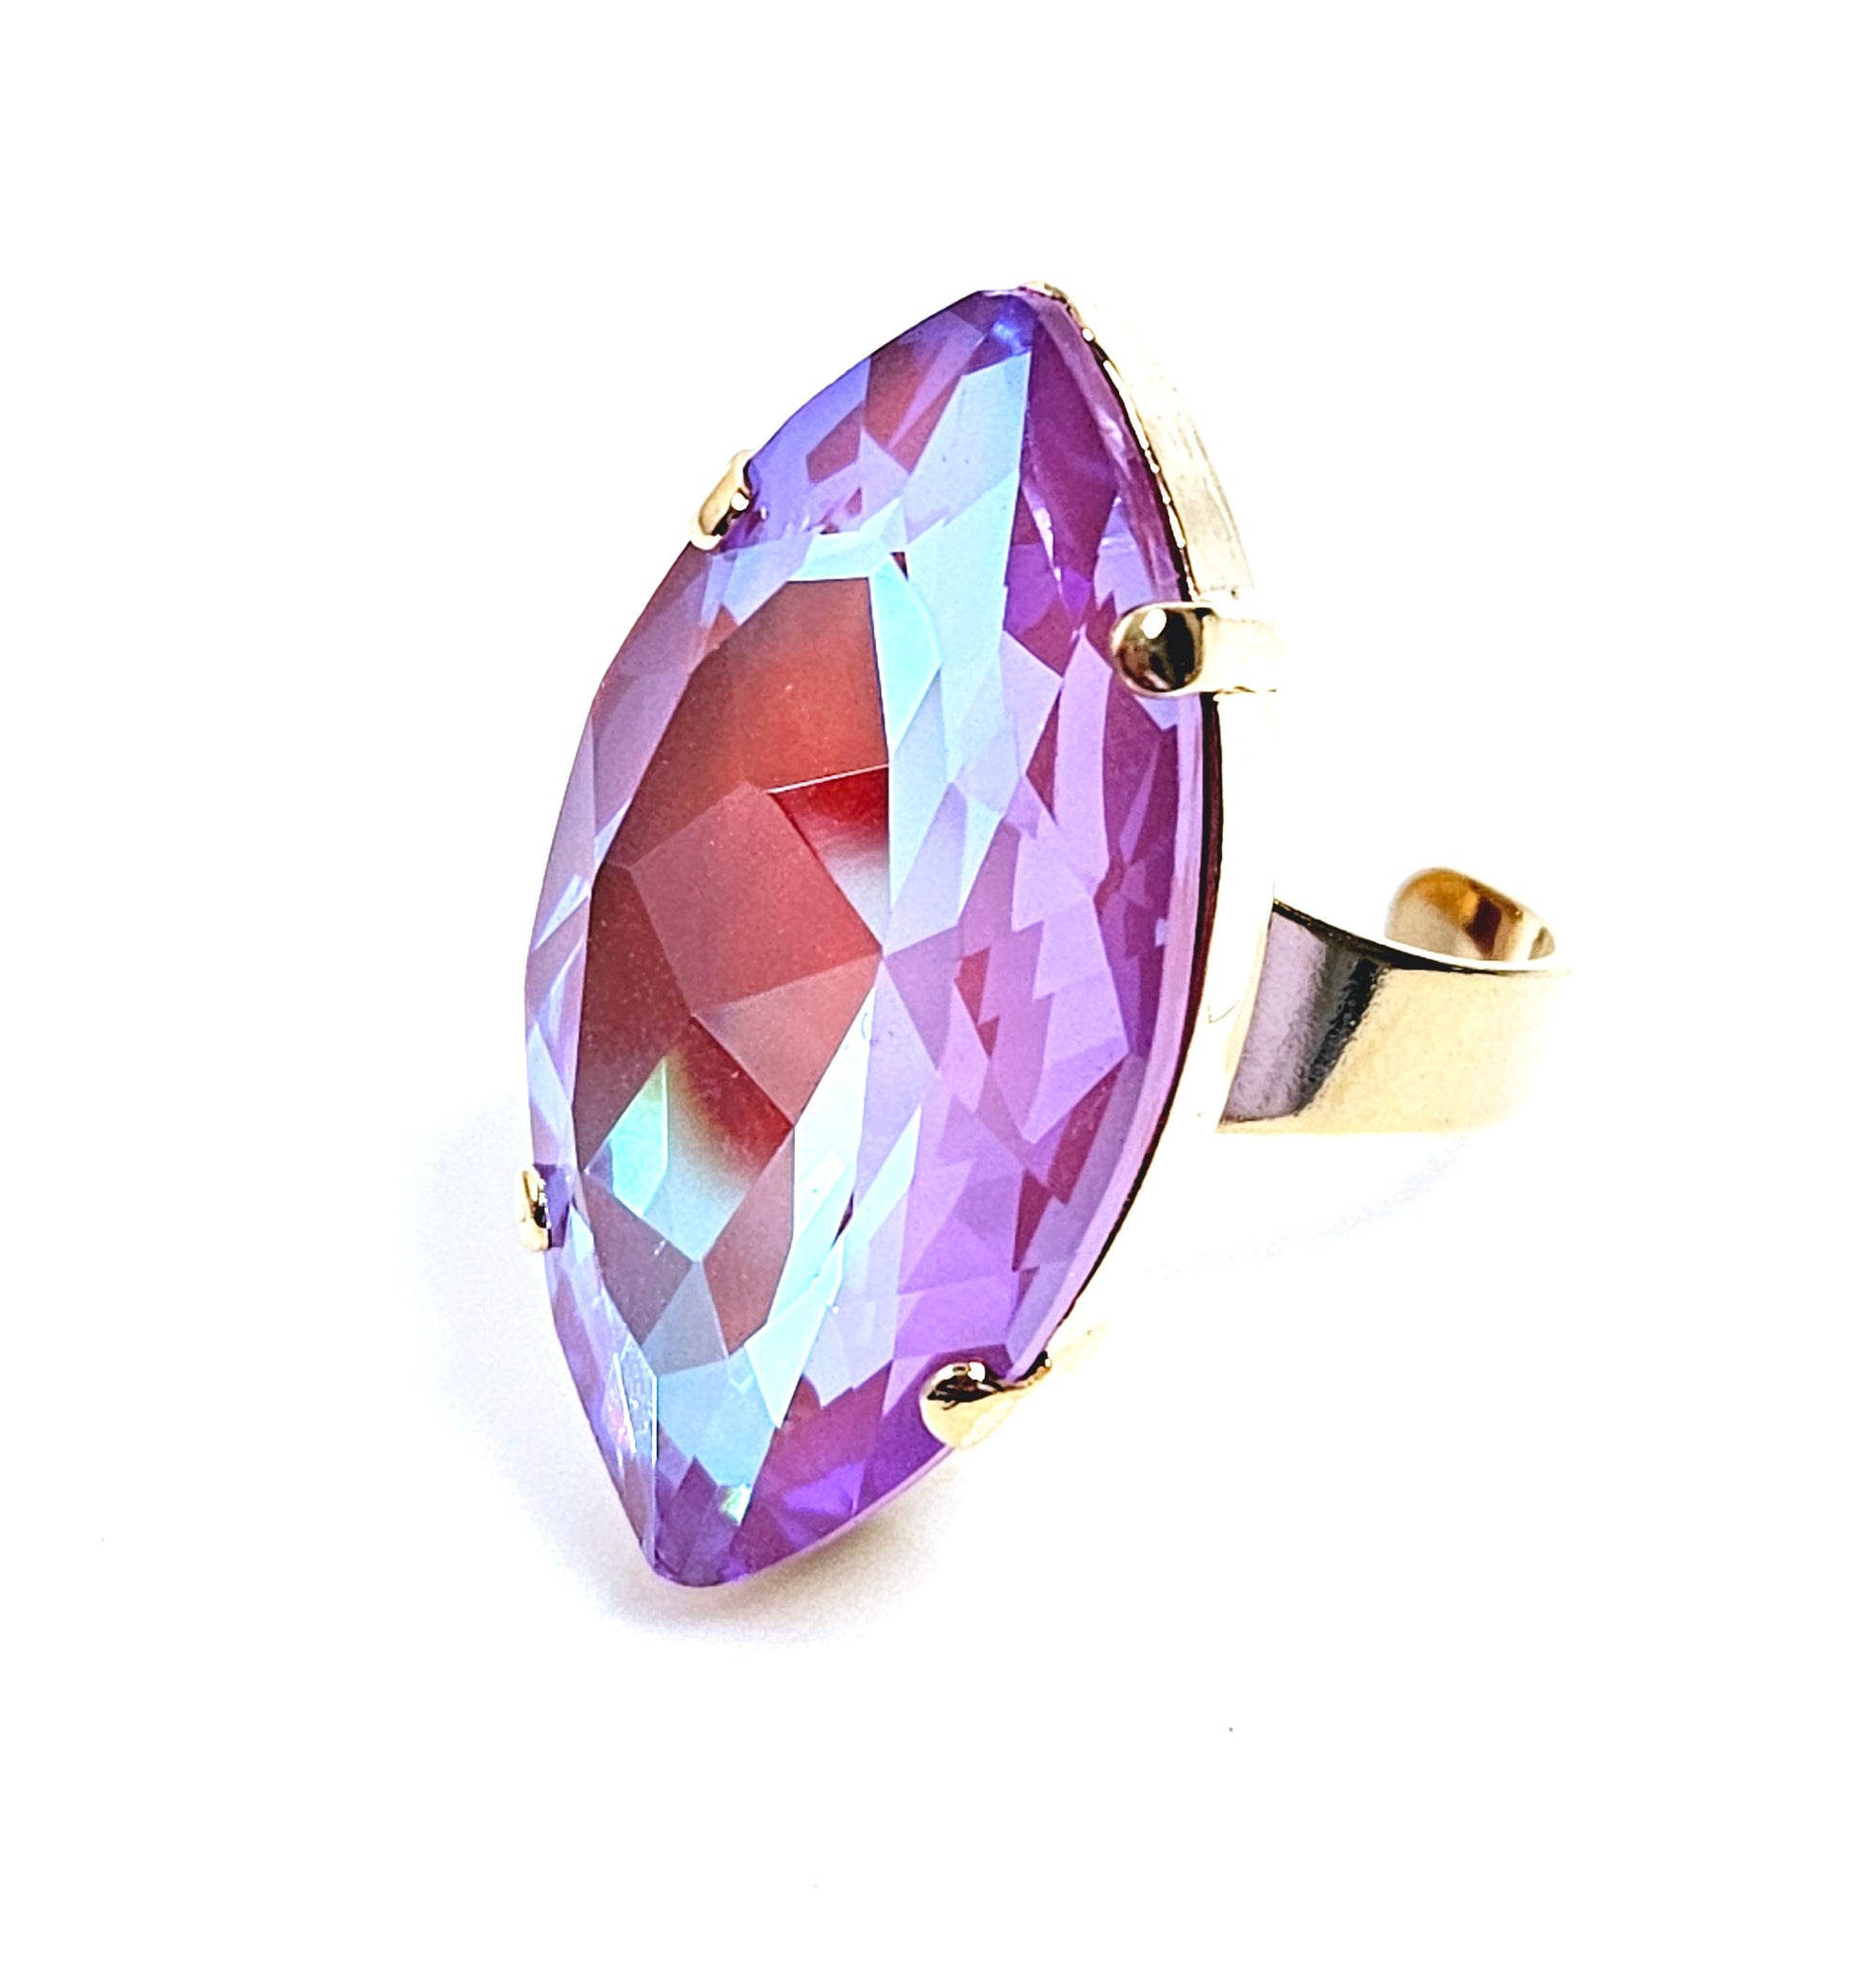 Large Lilac Crystal Ring, Large Lilac Delite Statement Ring, Gold Plated, Georgian Collet, Vintage Style, Rings For Women, Dark Red Navette